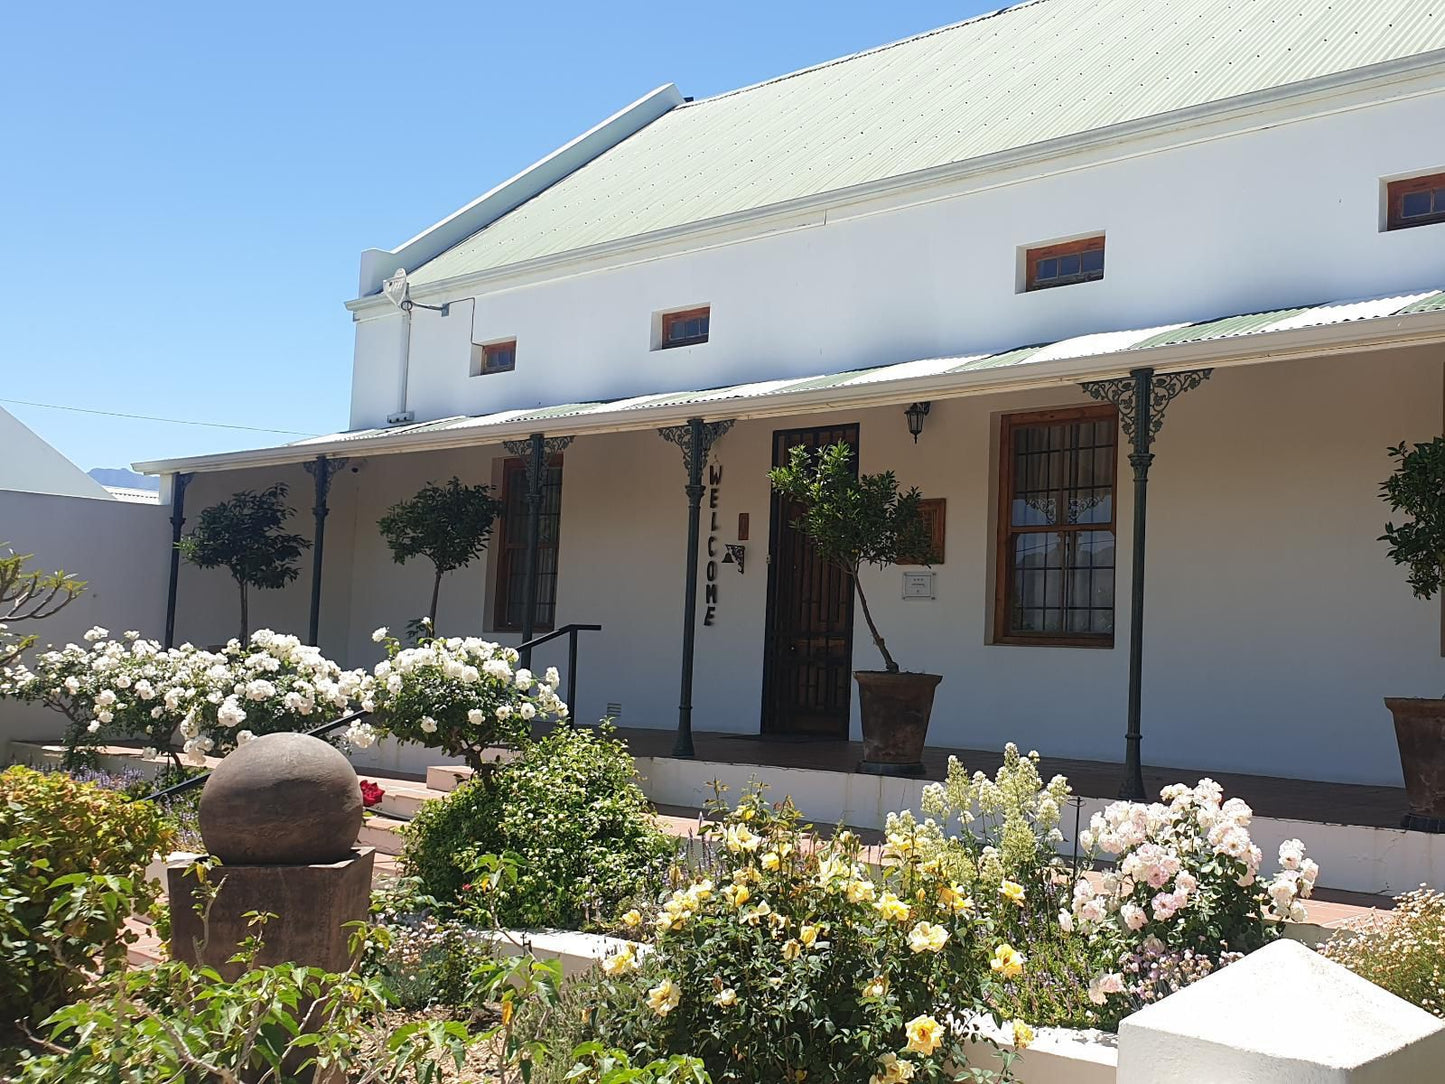 Big Sky Villa Tulbagh Western Cape South Africa House, Building, Architecture